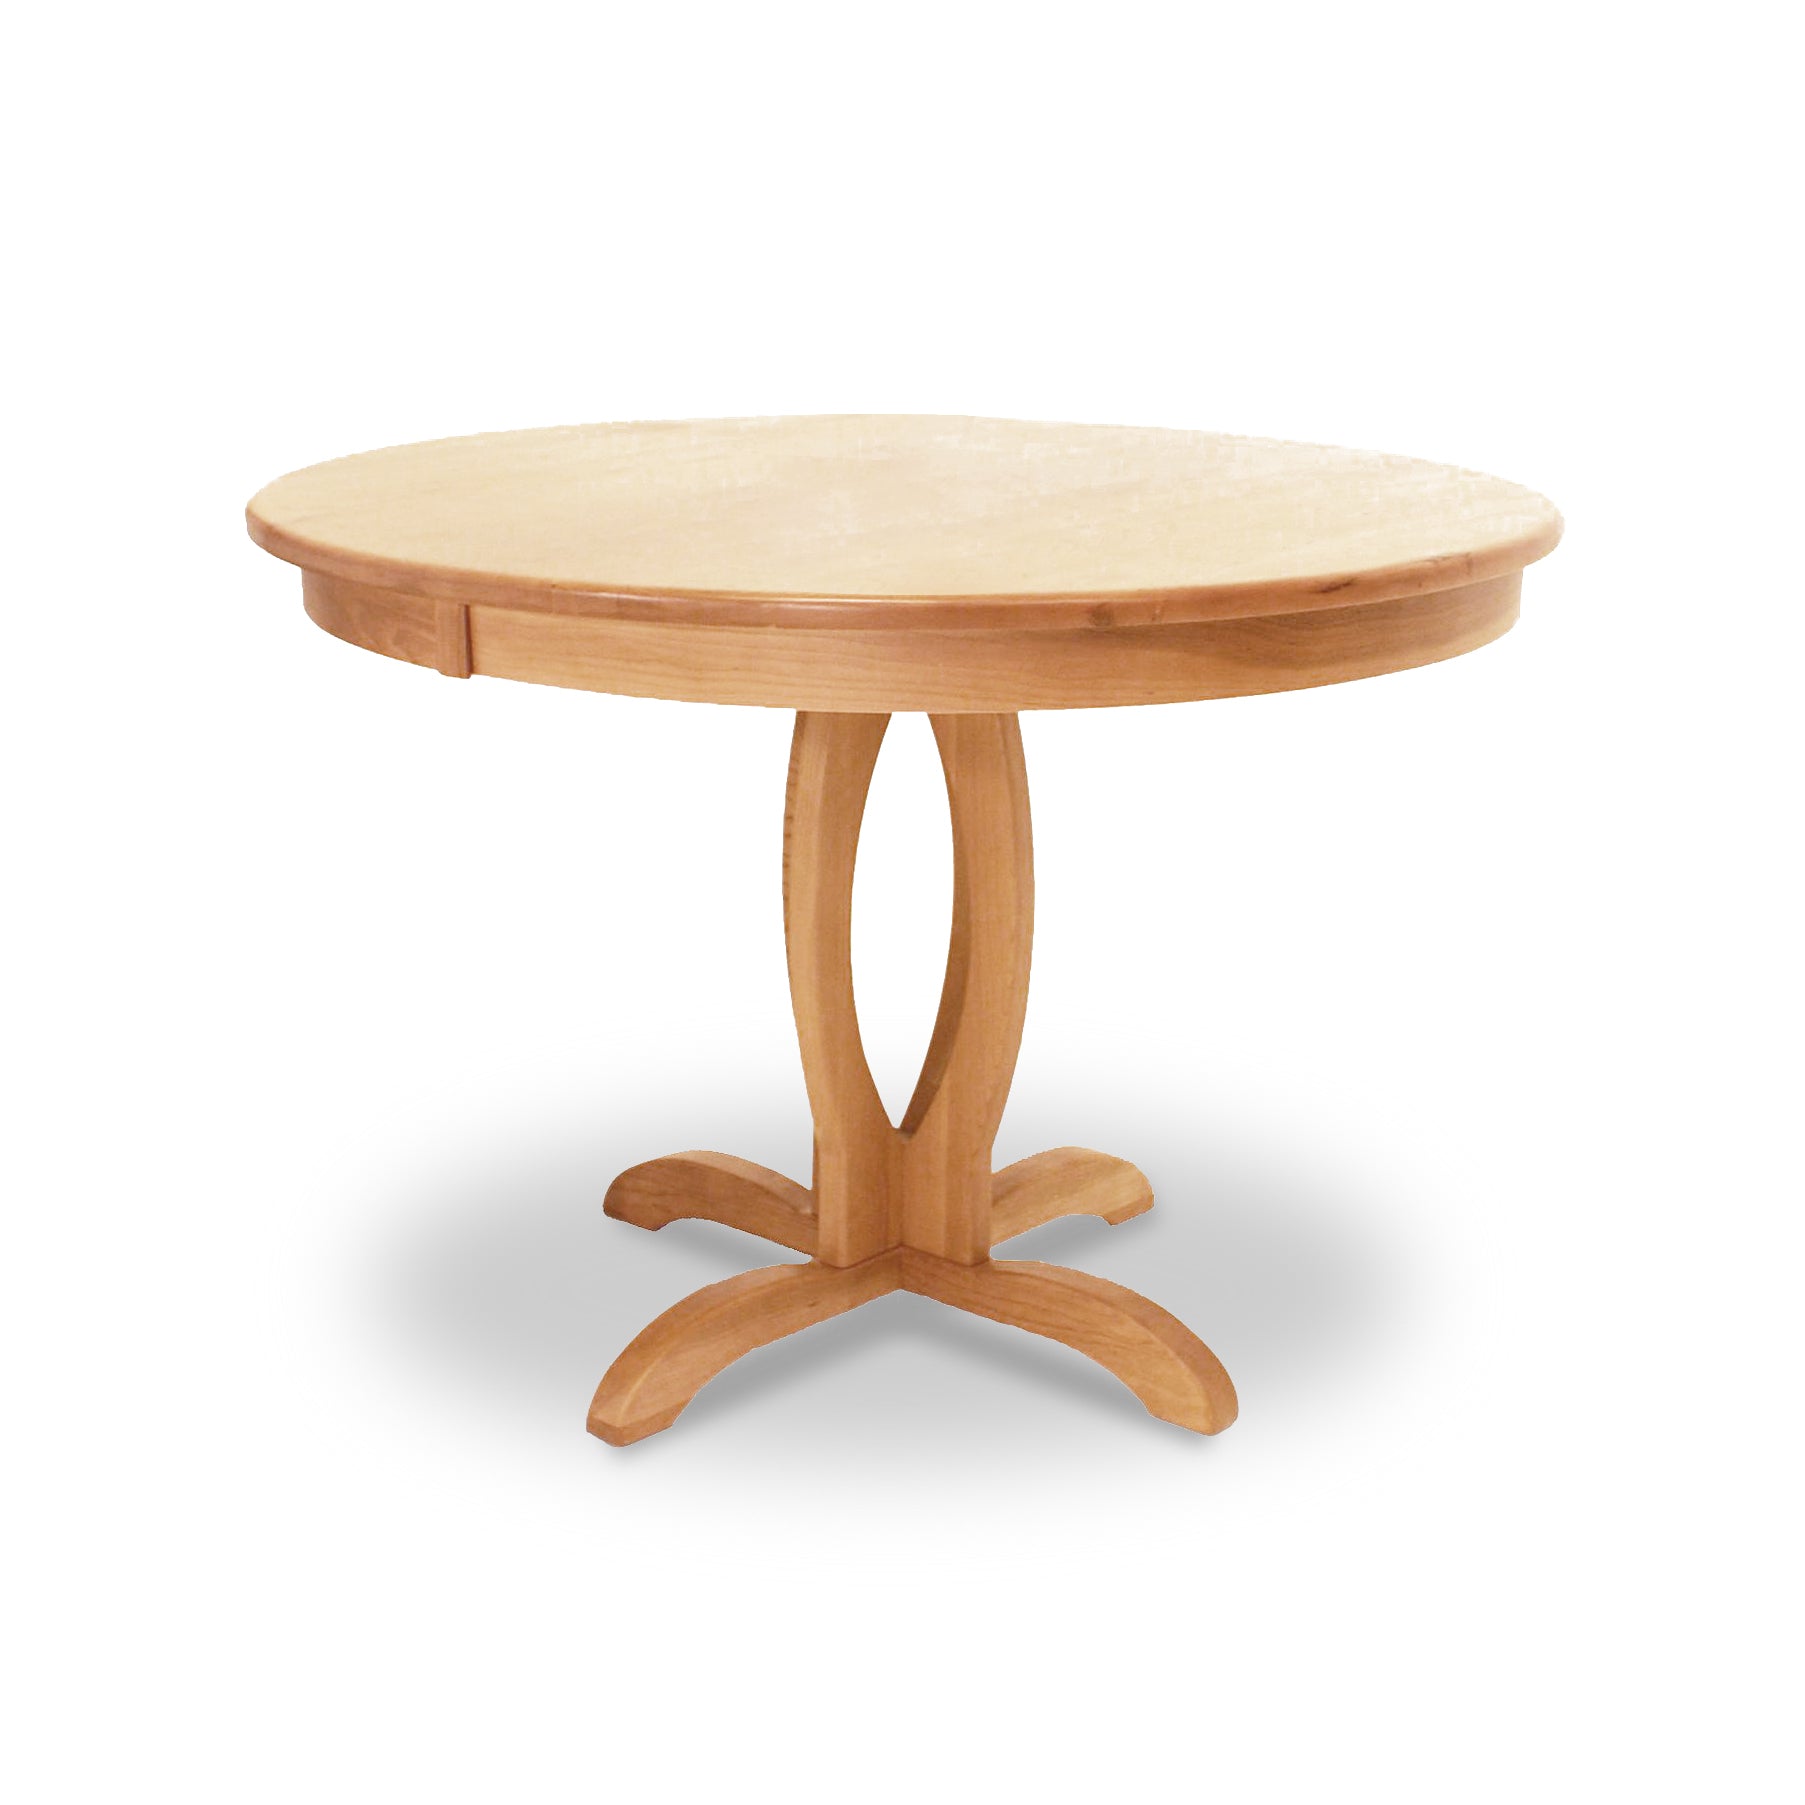 A Cherry Blossom Single Pedestal Round Table by Lyndon Furniture, with a wooden base and a natural wood finish.